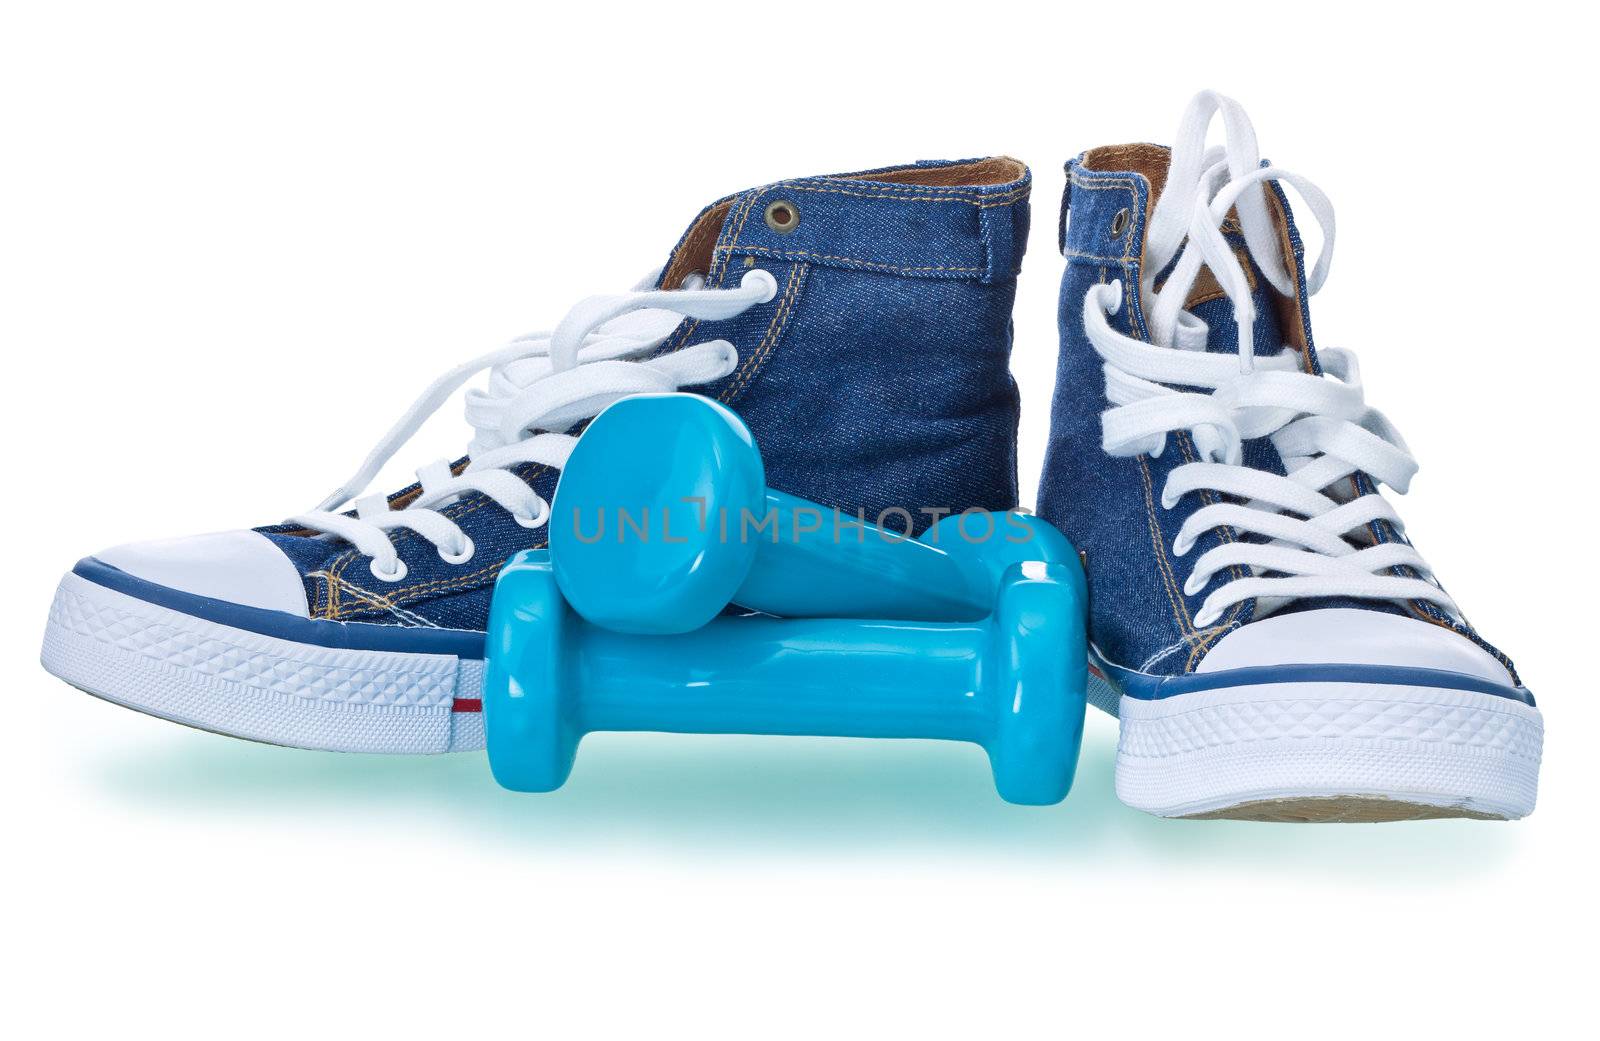 pair of simple gumshoes ( sneakers ) of denim canvas  on a white background